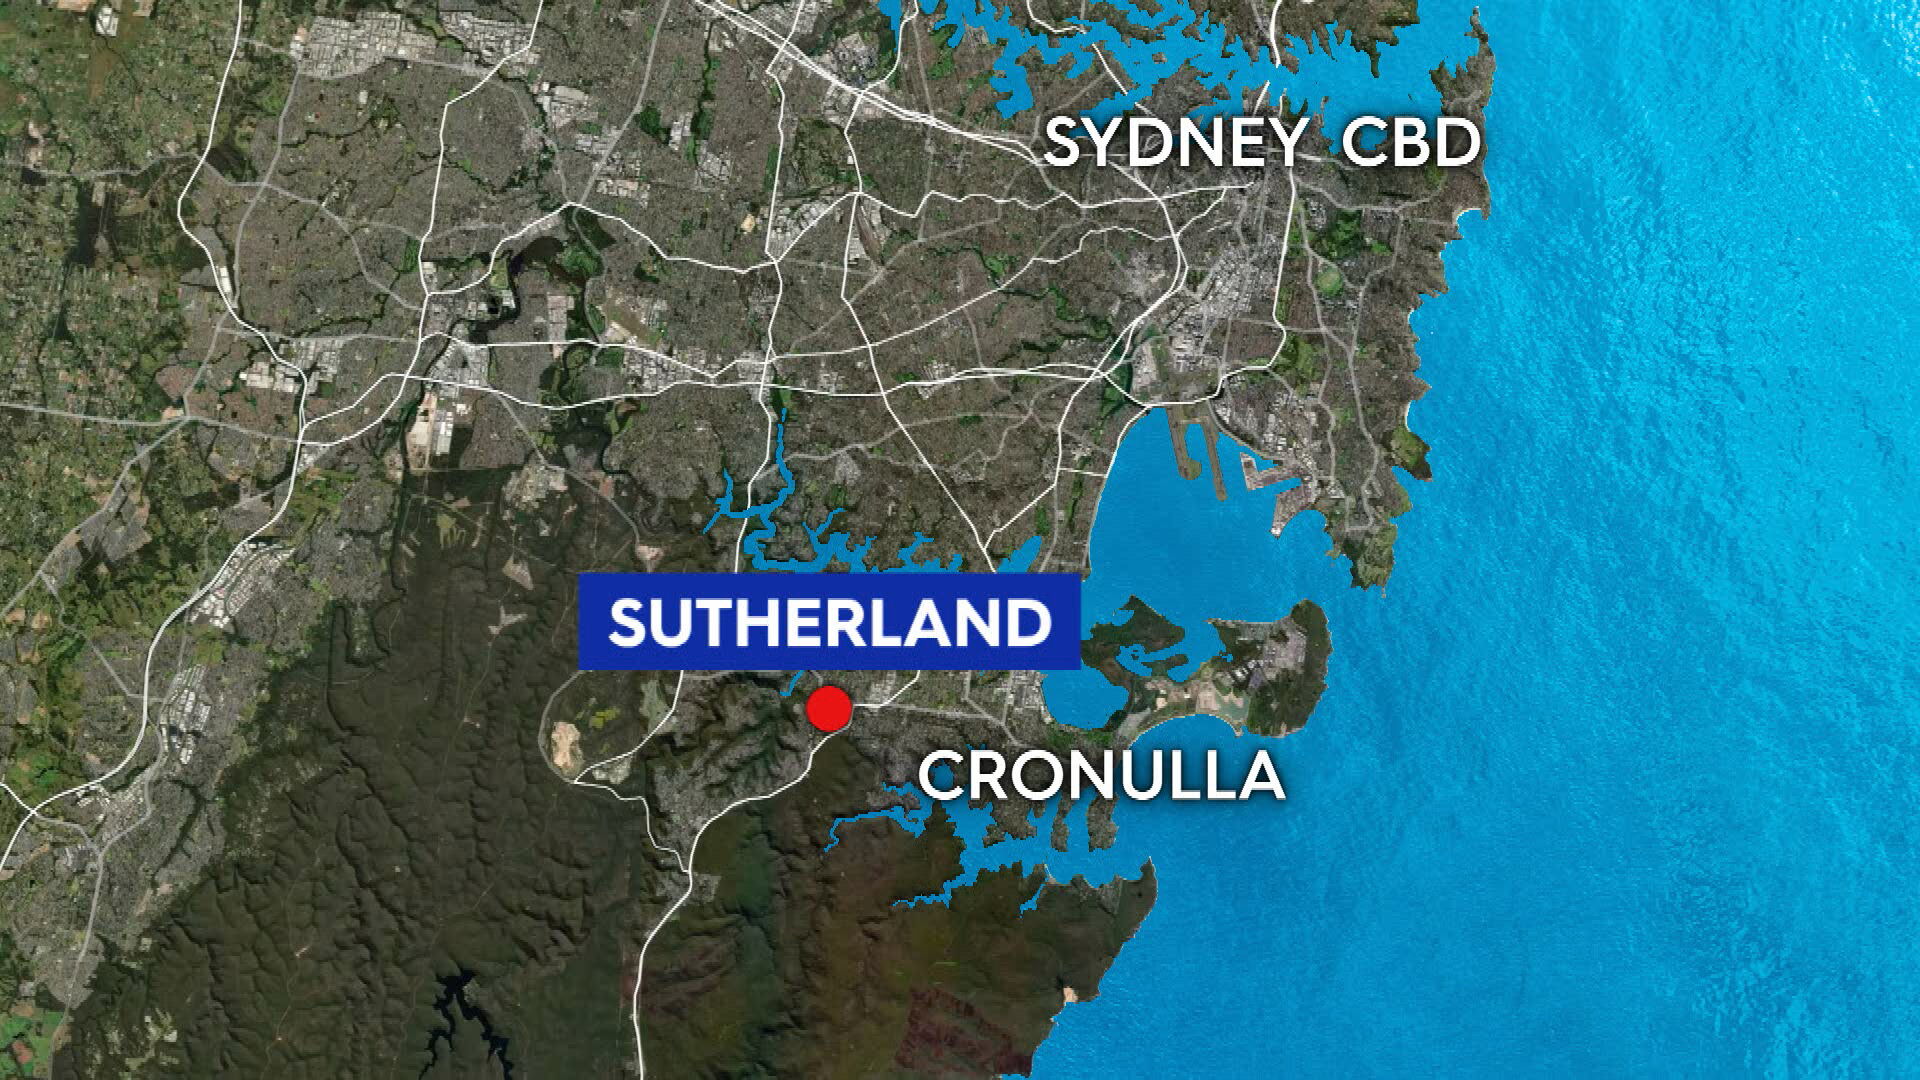 Security guard killed after alleged assault in Sydney